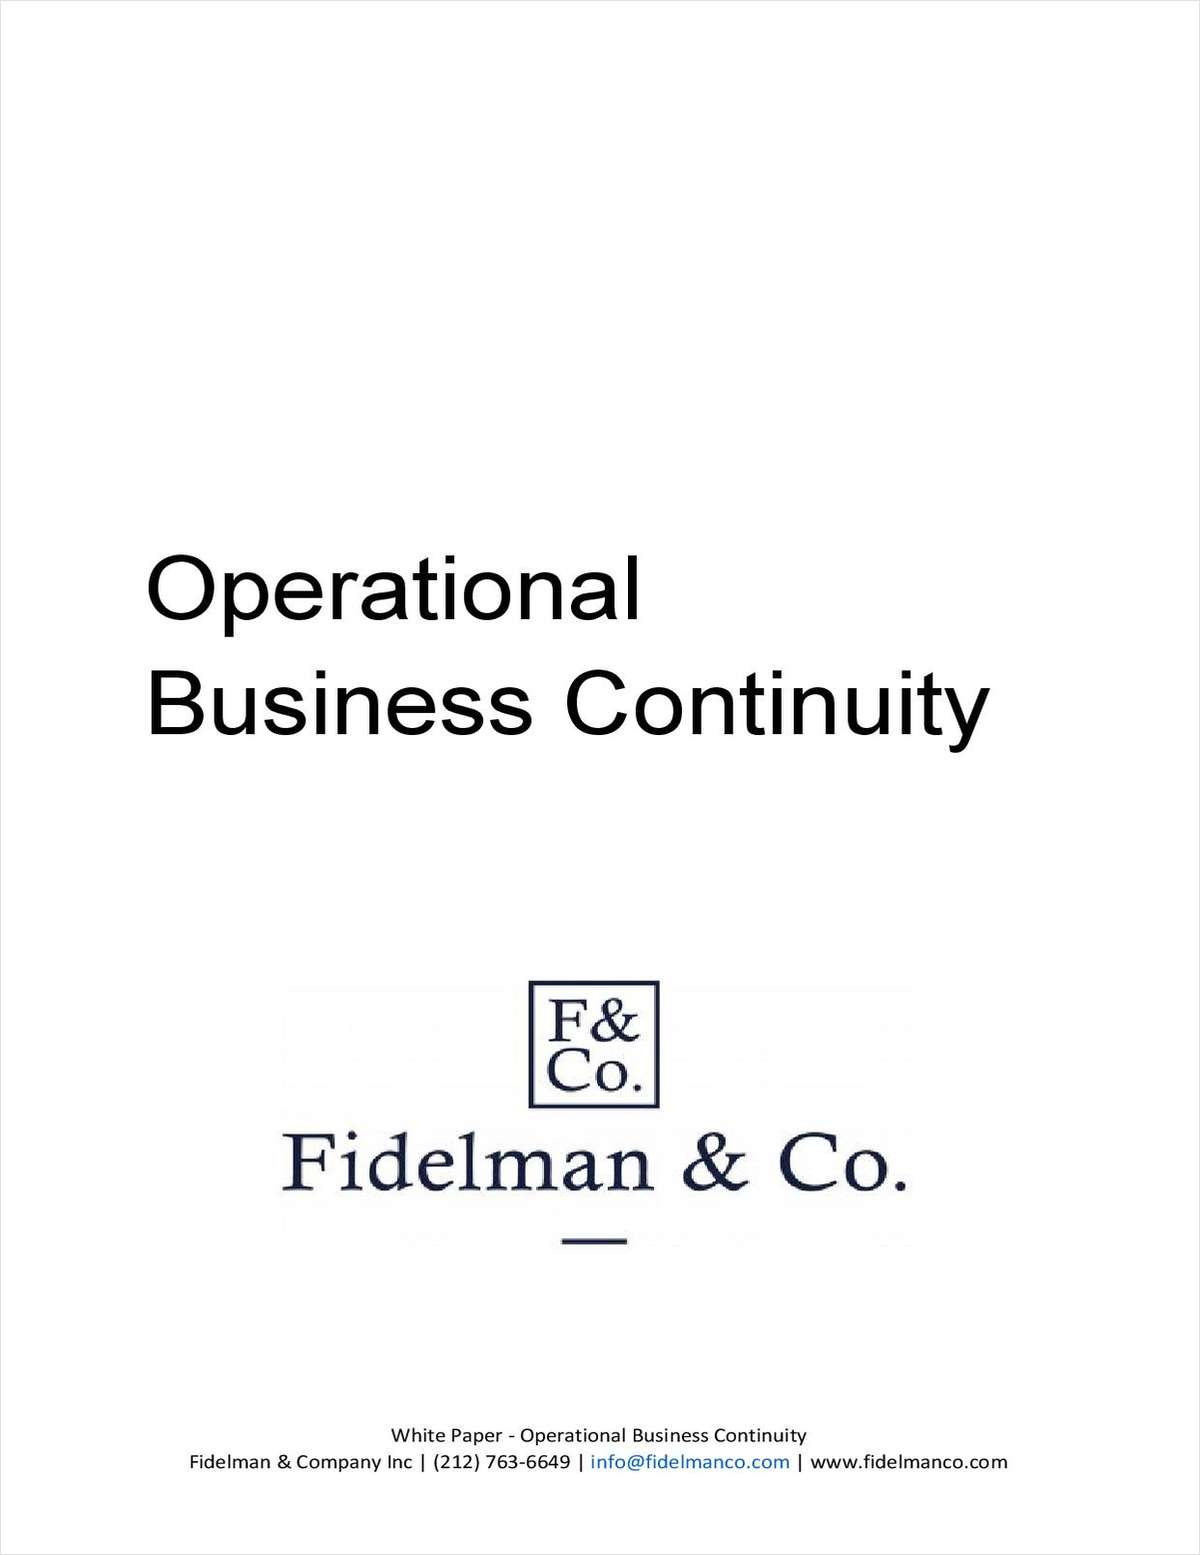 Operational Business Continuity